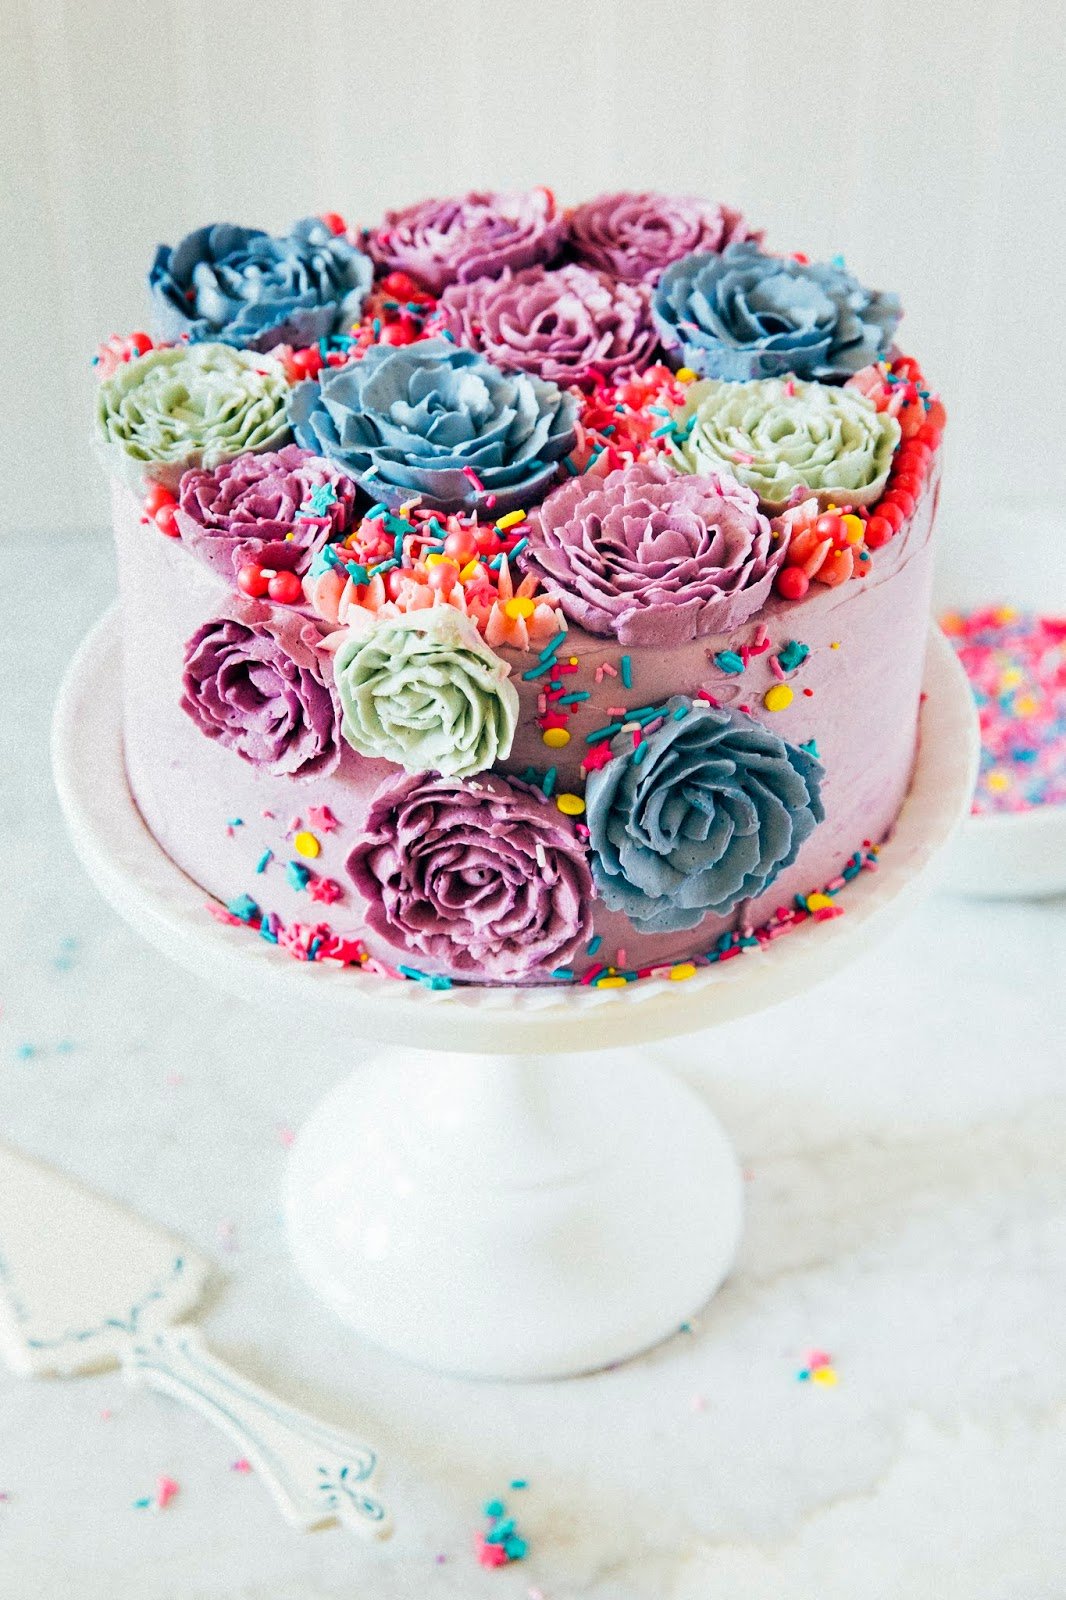 Buttercream Flower Cakes Are a Delicious Way to Welcome Spring